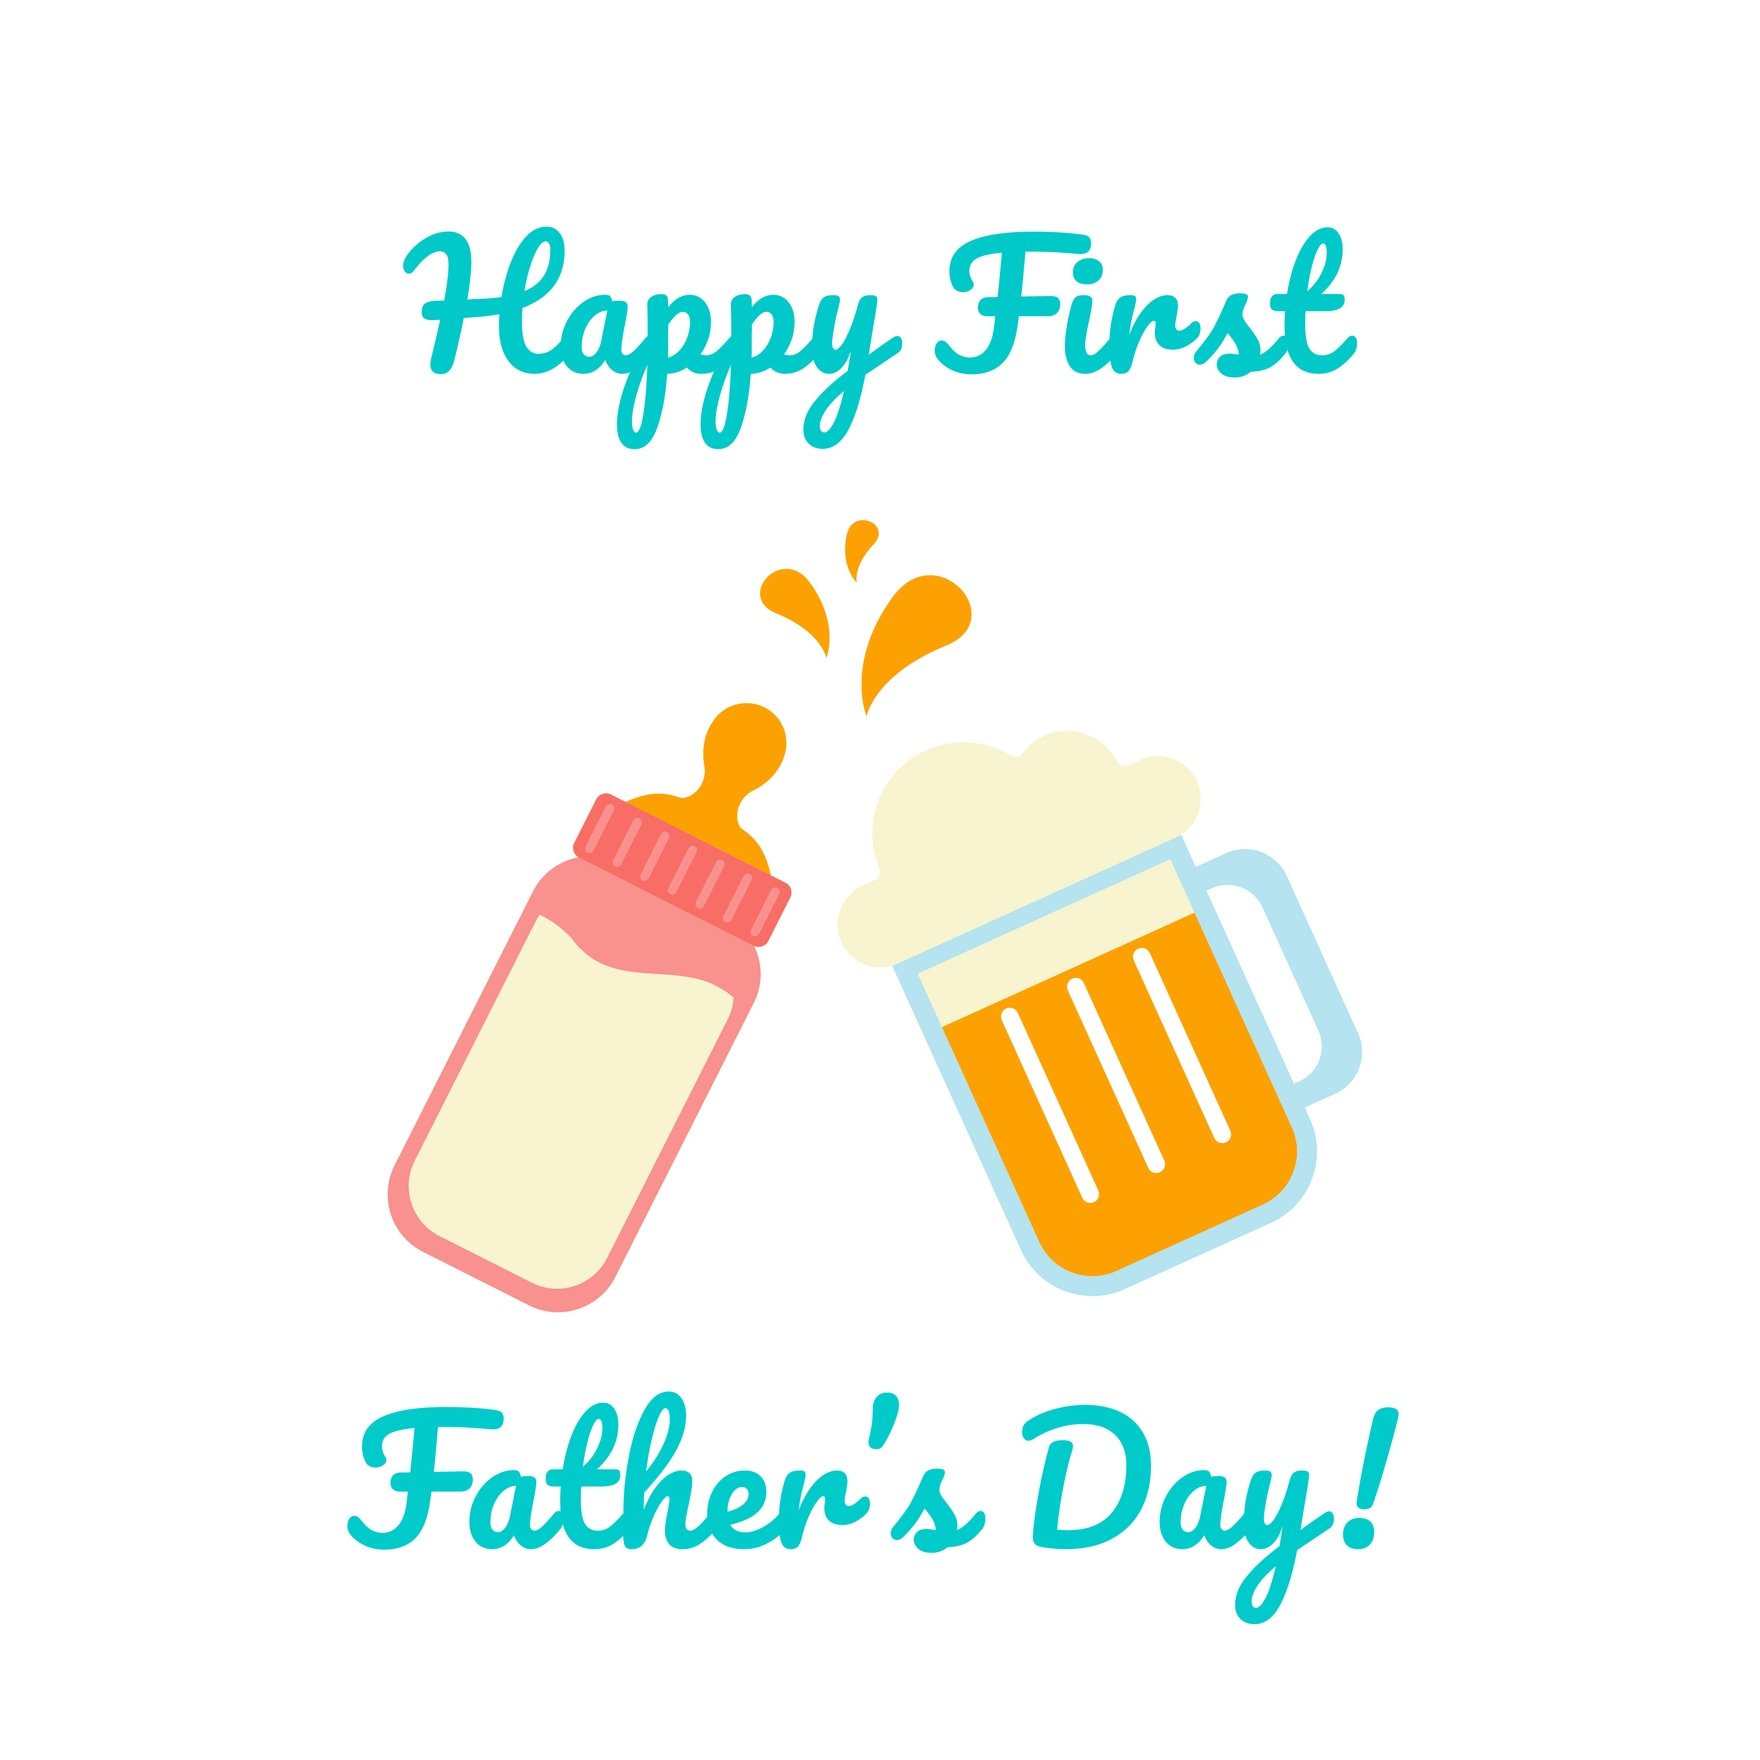 Black Happy Father's Day Gif in Illustrator, EPS, SVG, JPG, GIF, PNG, After Effects